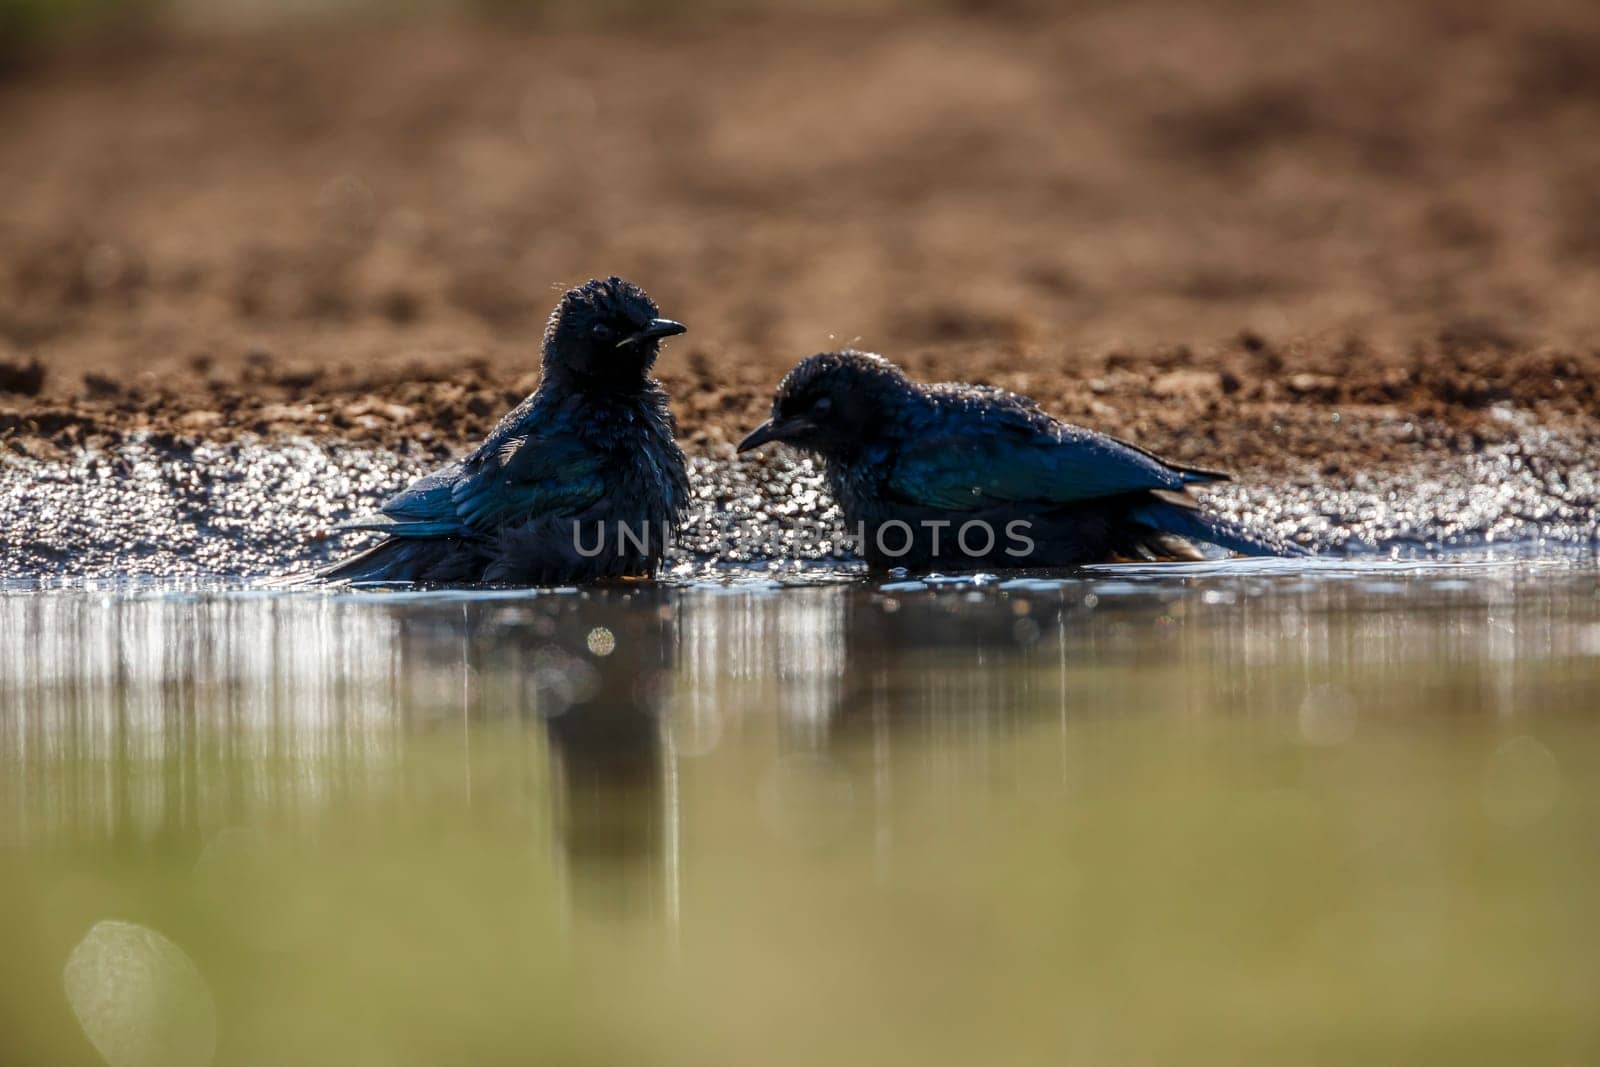 Cape glossy starling in Kruger National park, South Africa by PACOCOMO